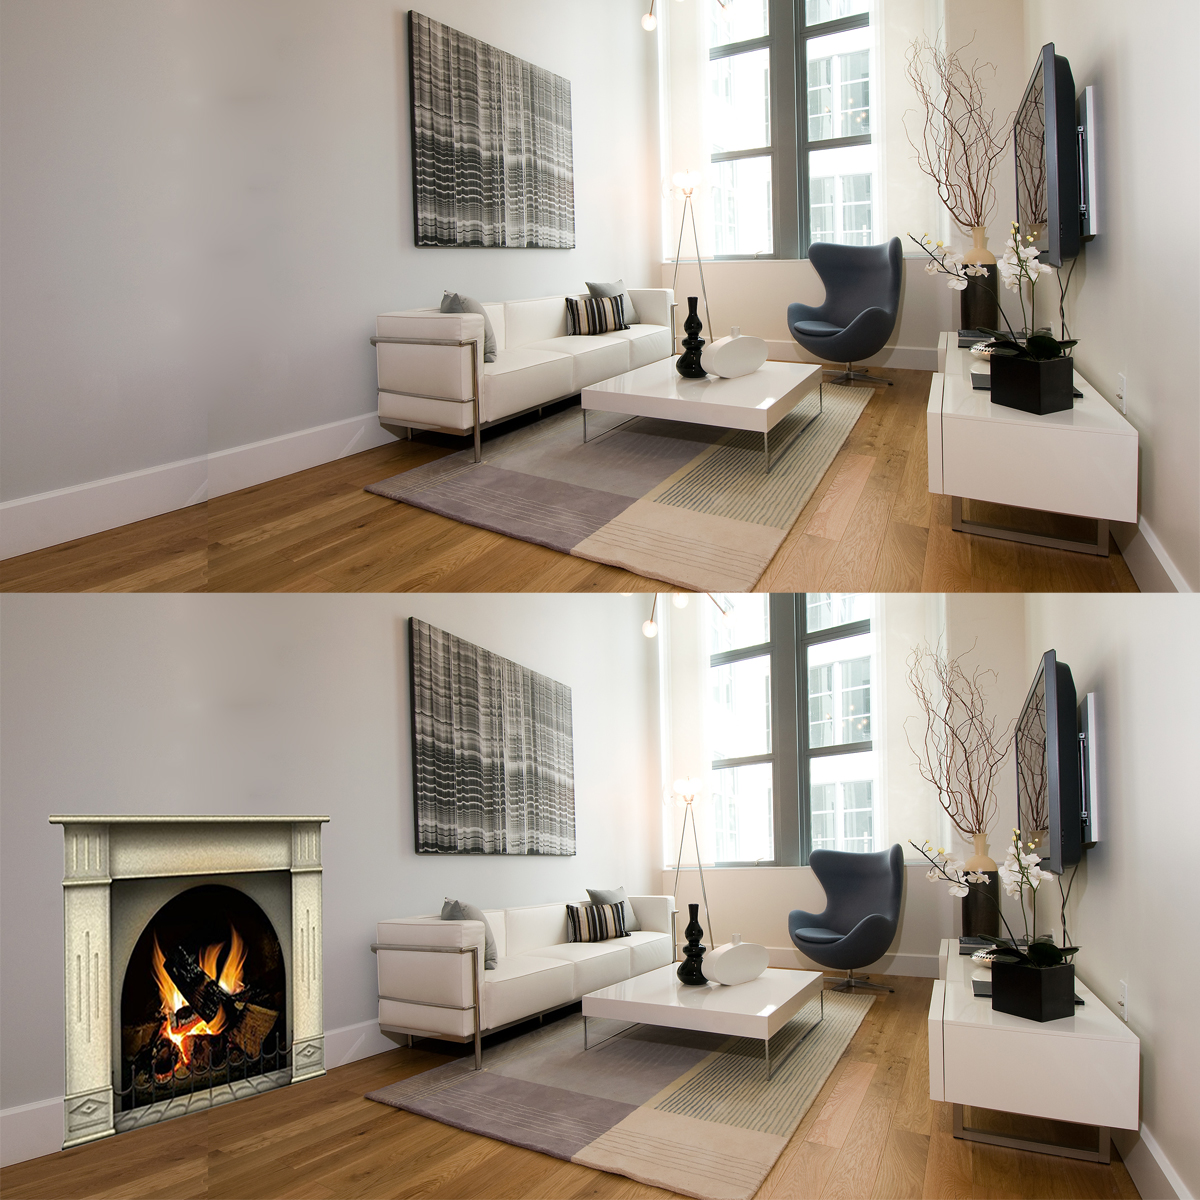 Want a replica fireplace for Christmas stockings and photos? A 3-D cardboard fireplace or removable vinyl wall fireplace decal can be a great substitute.